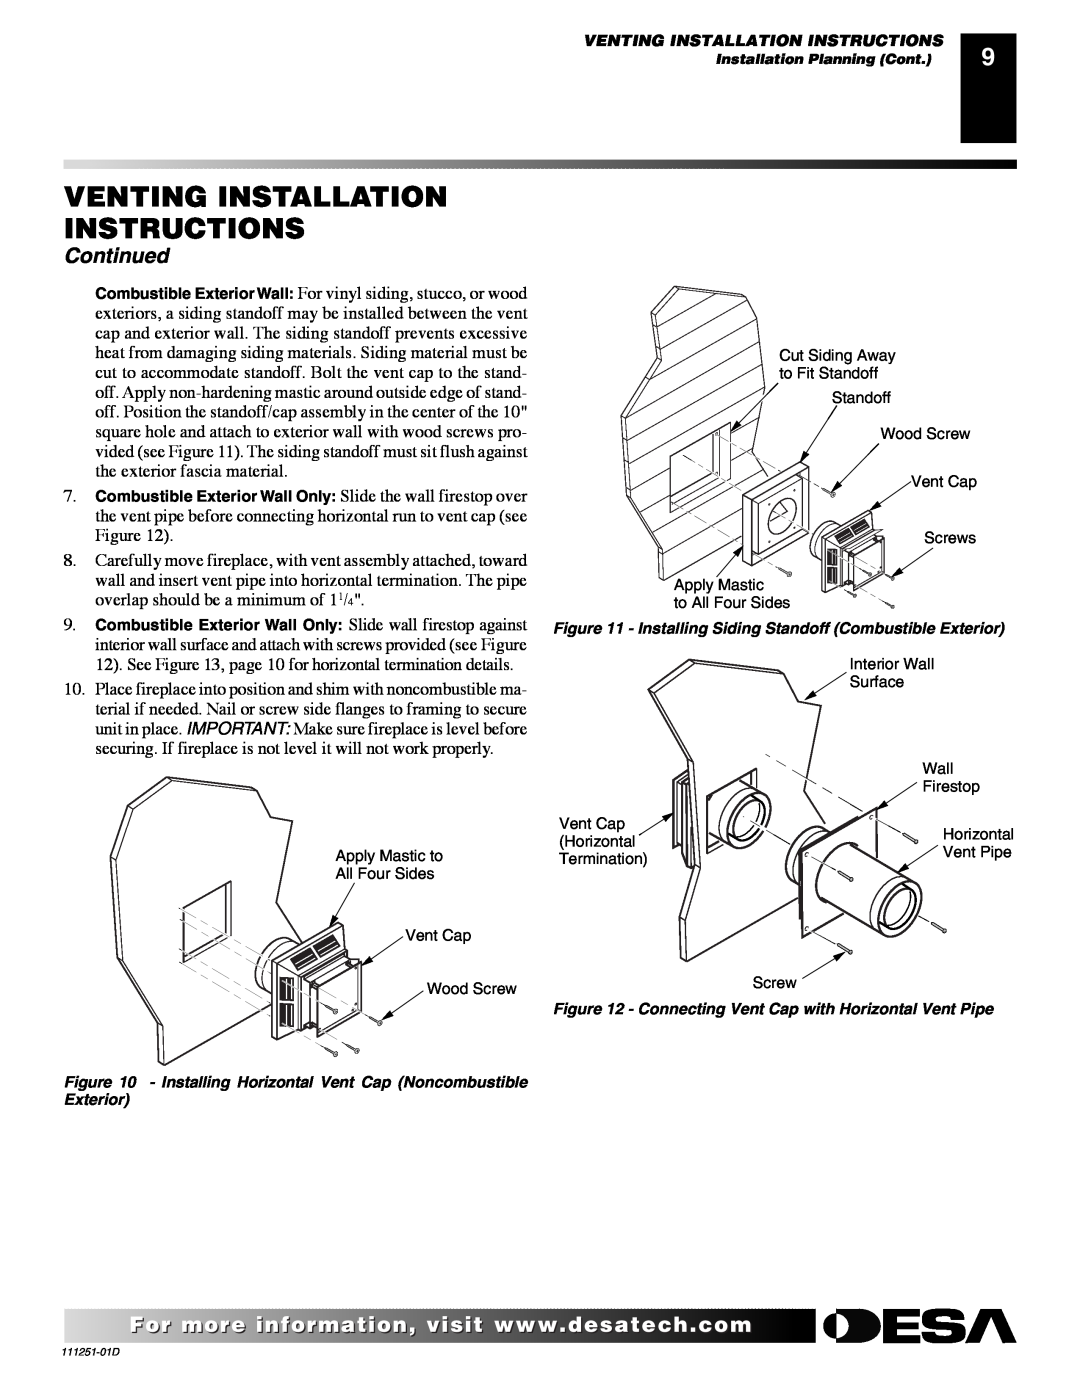 Desa (V)T36ENA SERIES, (V)T36EPA SERIES, (V)T36EPA SERIES, (V)T36ENA SERIES Venting Installation Instructions, Continued 